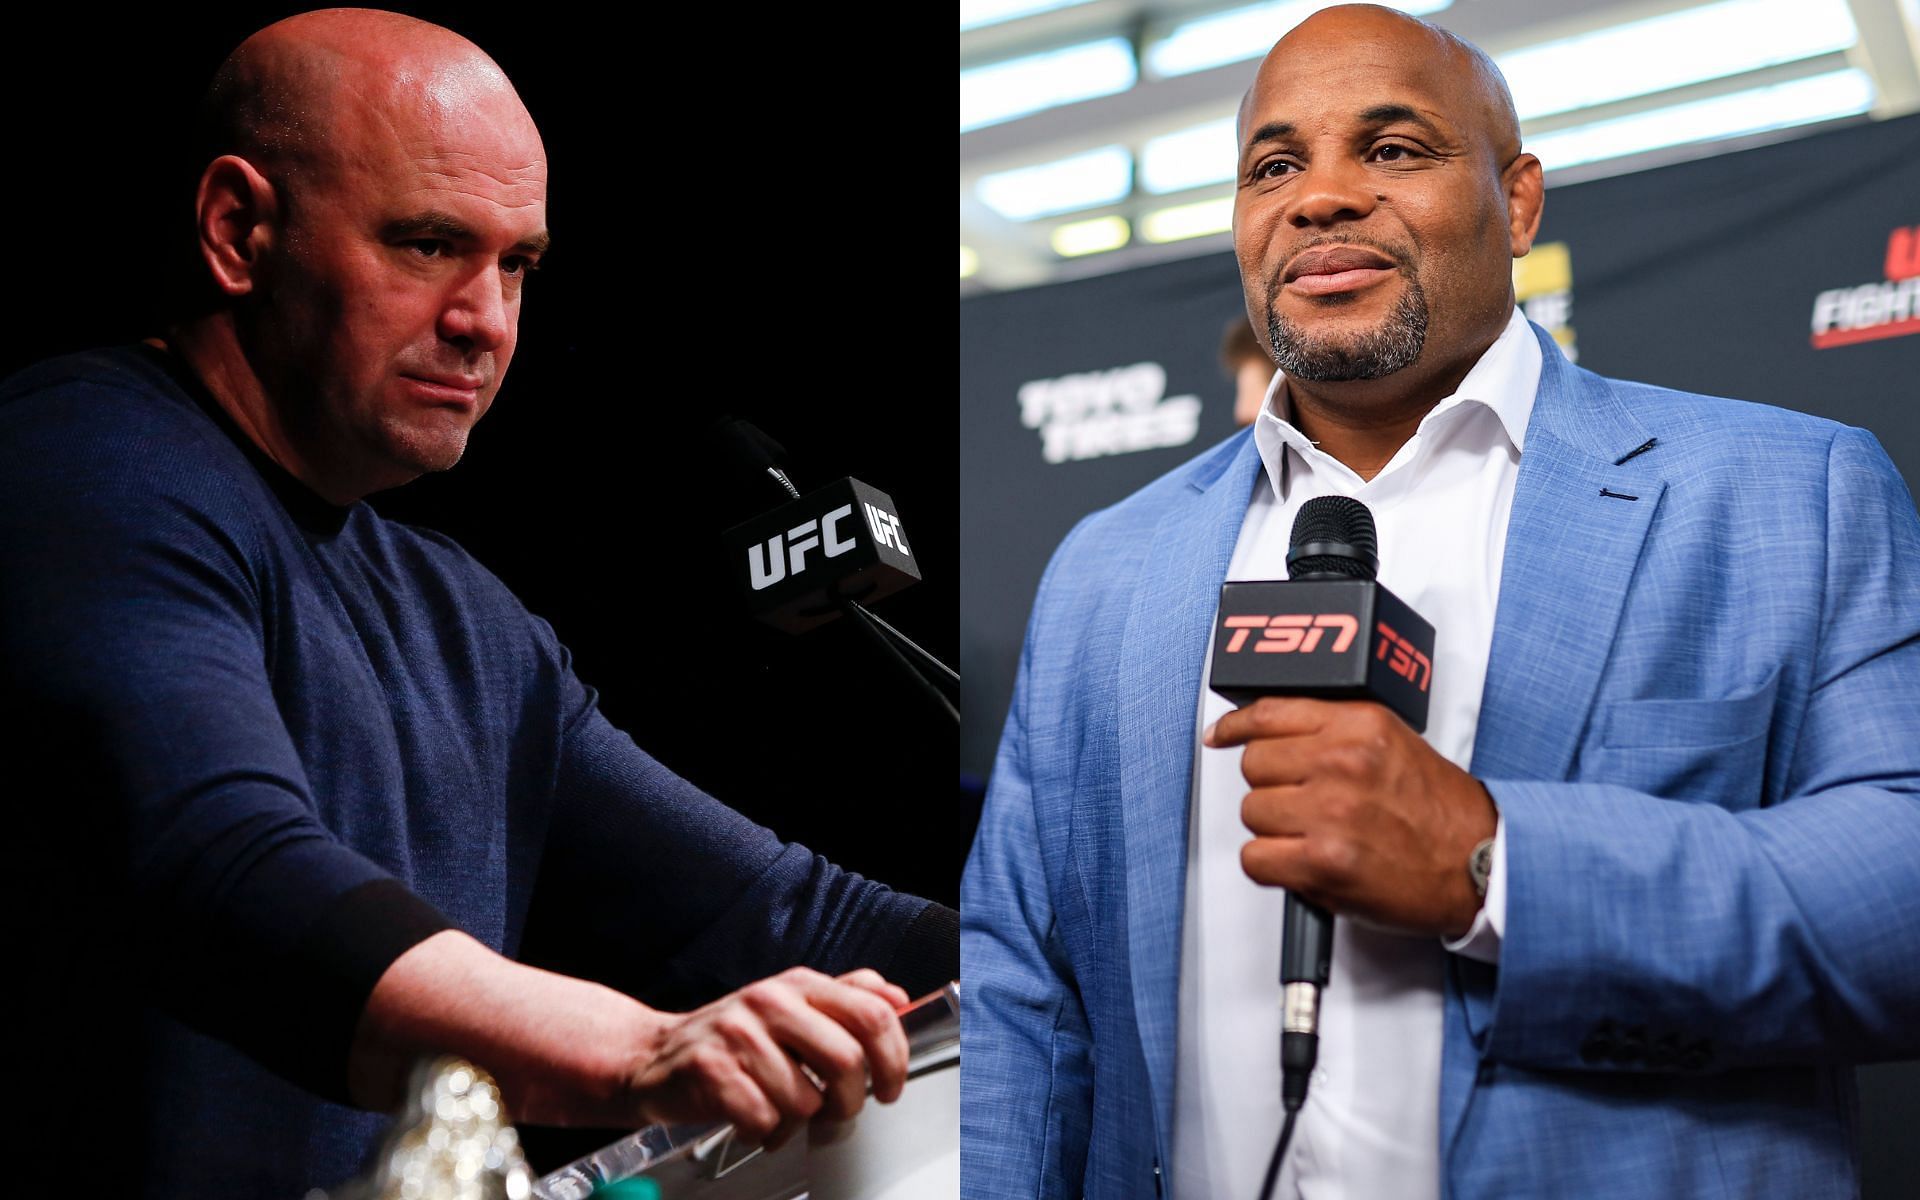 Dana White (left) and Daniel Cormier (right). [via Getty Images]